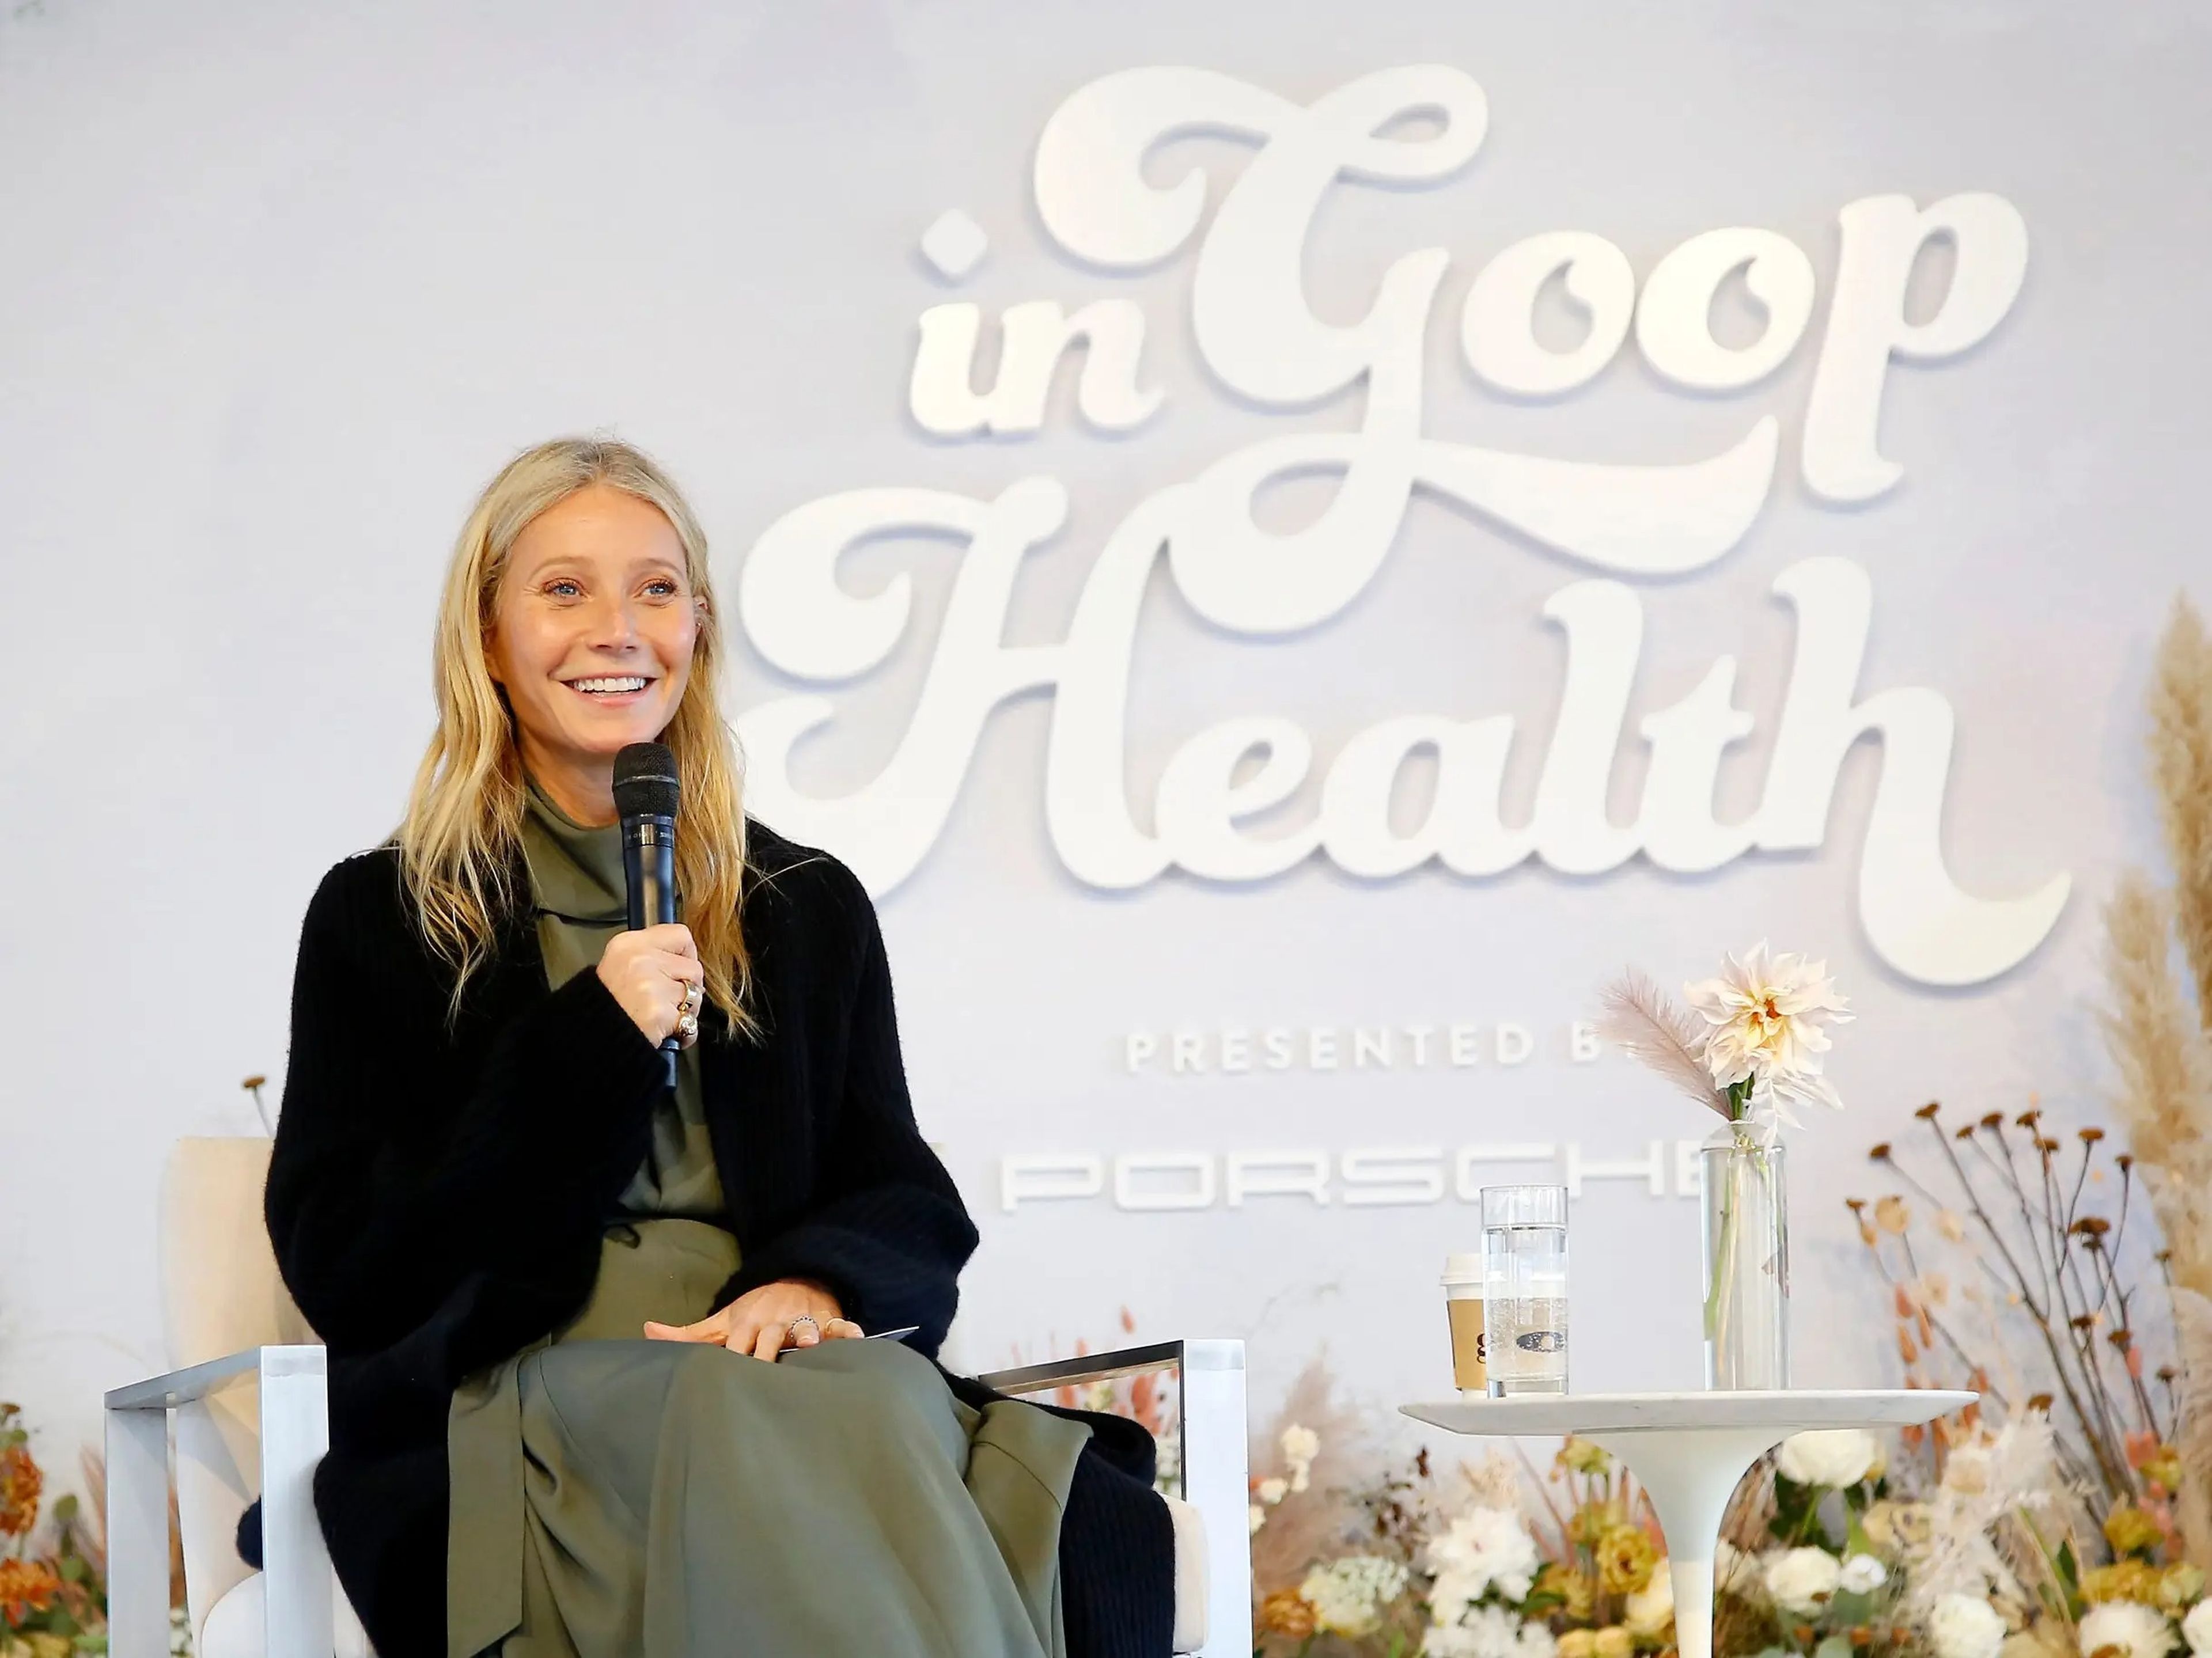 Paltrow sitting onstage with a microphone wearing a black sweater at a 'Goop in Health' event